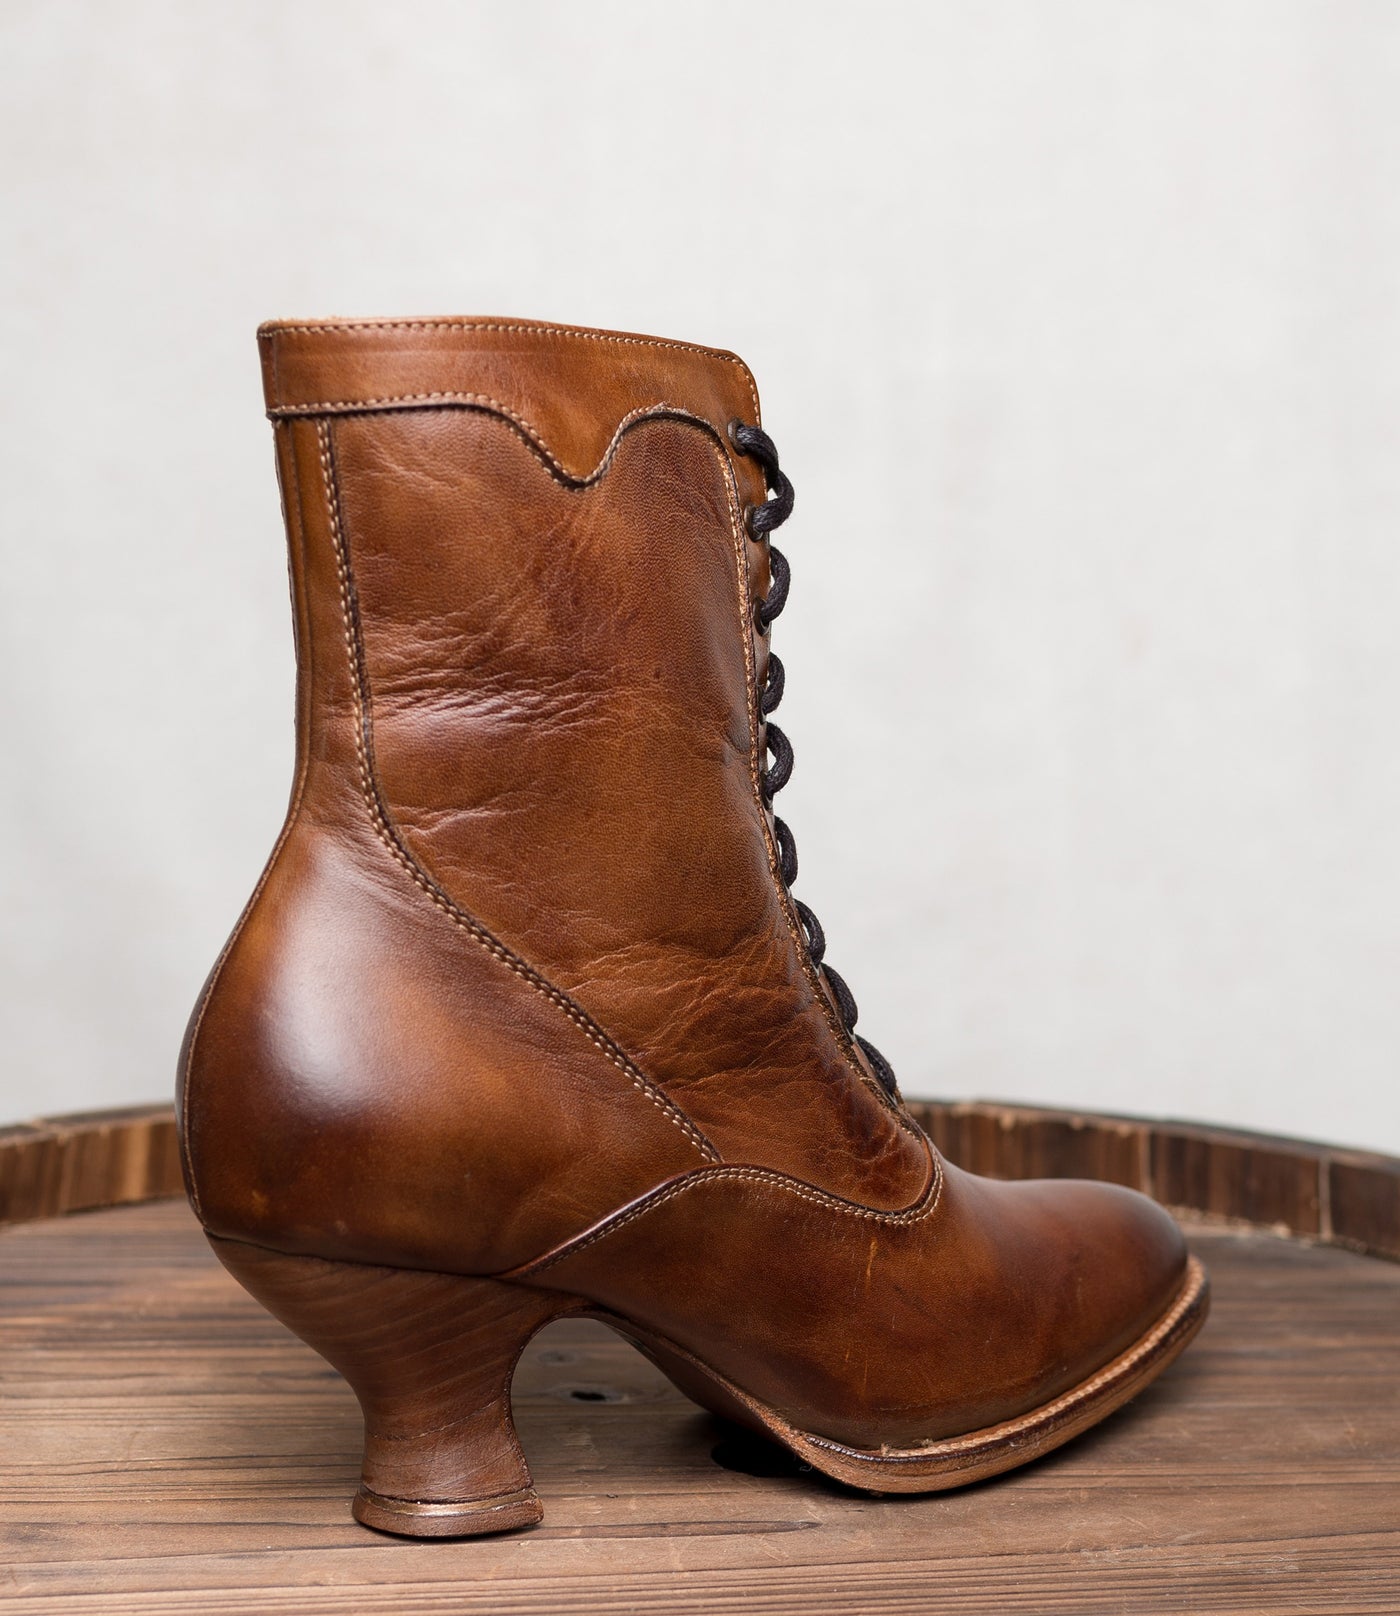 Victorian Inspired Leather Ankle Boots in Tan Rustic - SOLD OUT